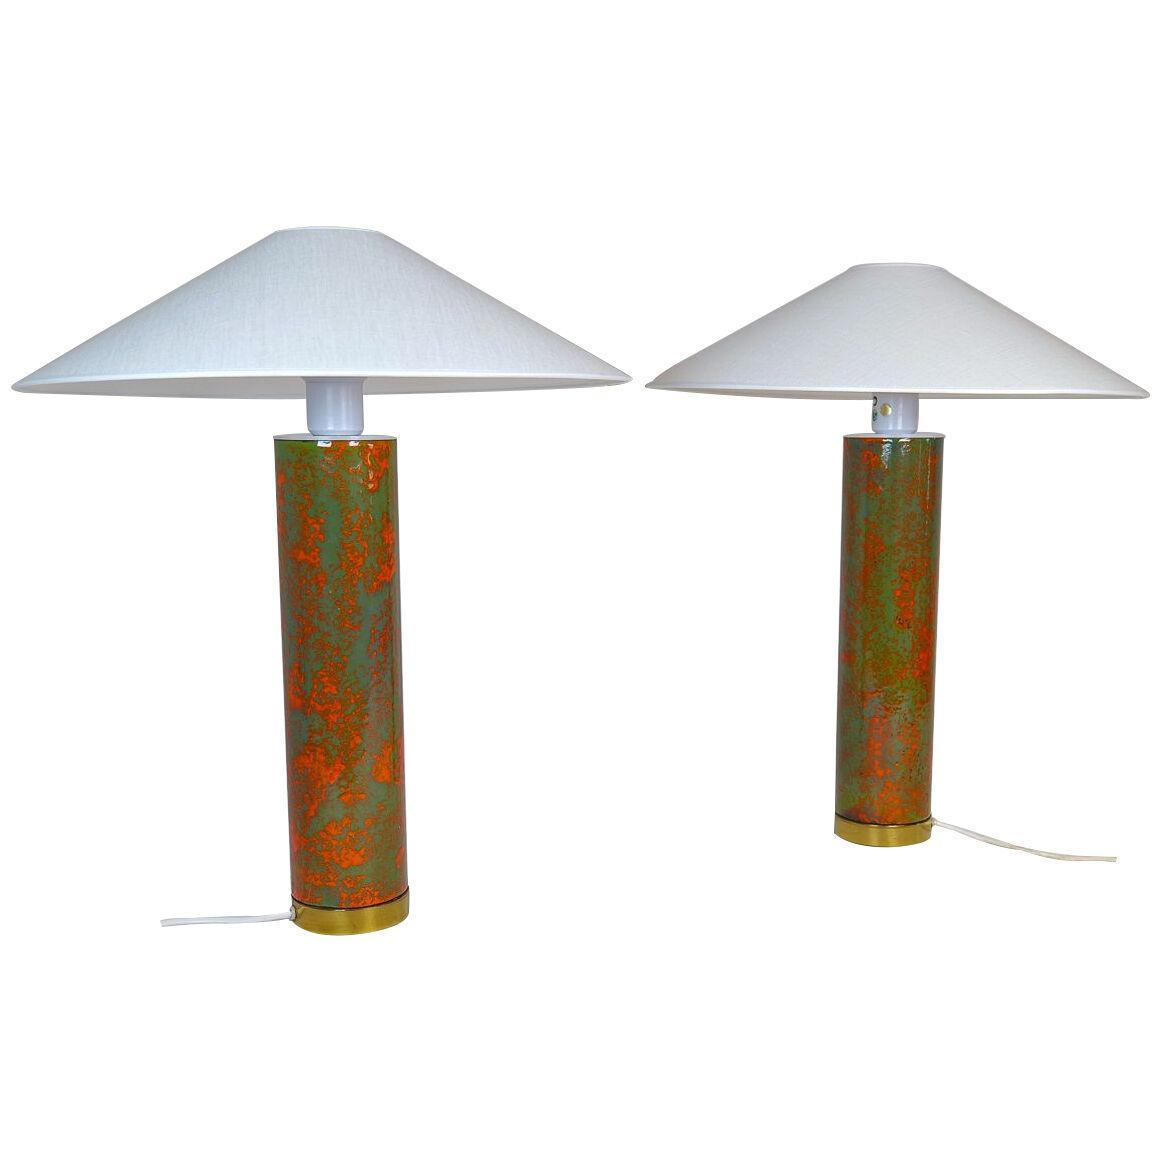 Midcentury Modern Rare and Large Ceramic Table Lamps Sweden 1960s